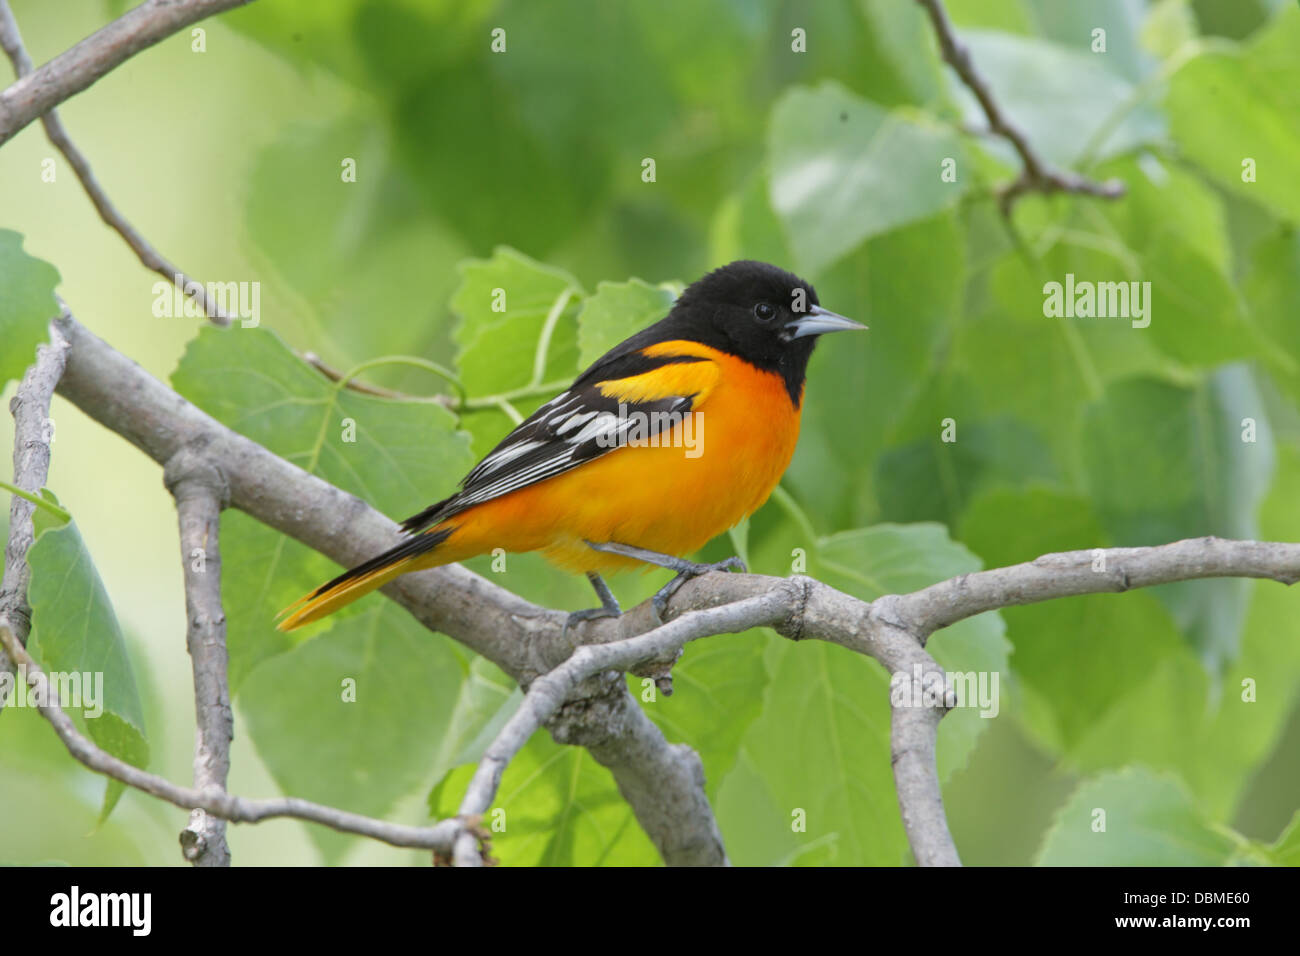 Baltimore Oriole perched in Cottonwood Tree perching bird songbird Ornithology Science Nature Wildlife Environment Stock Photo